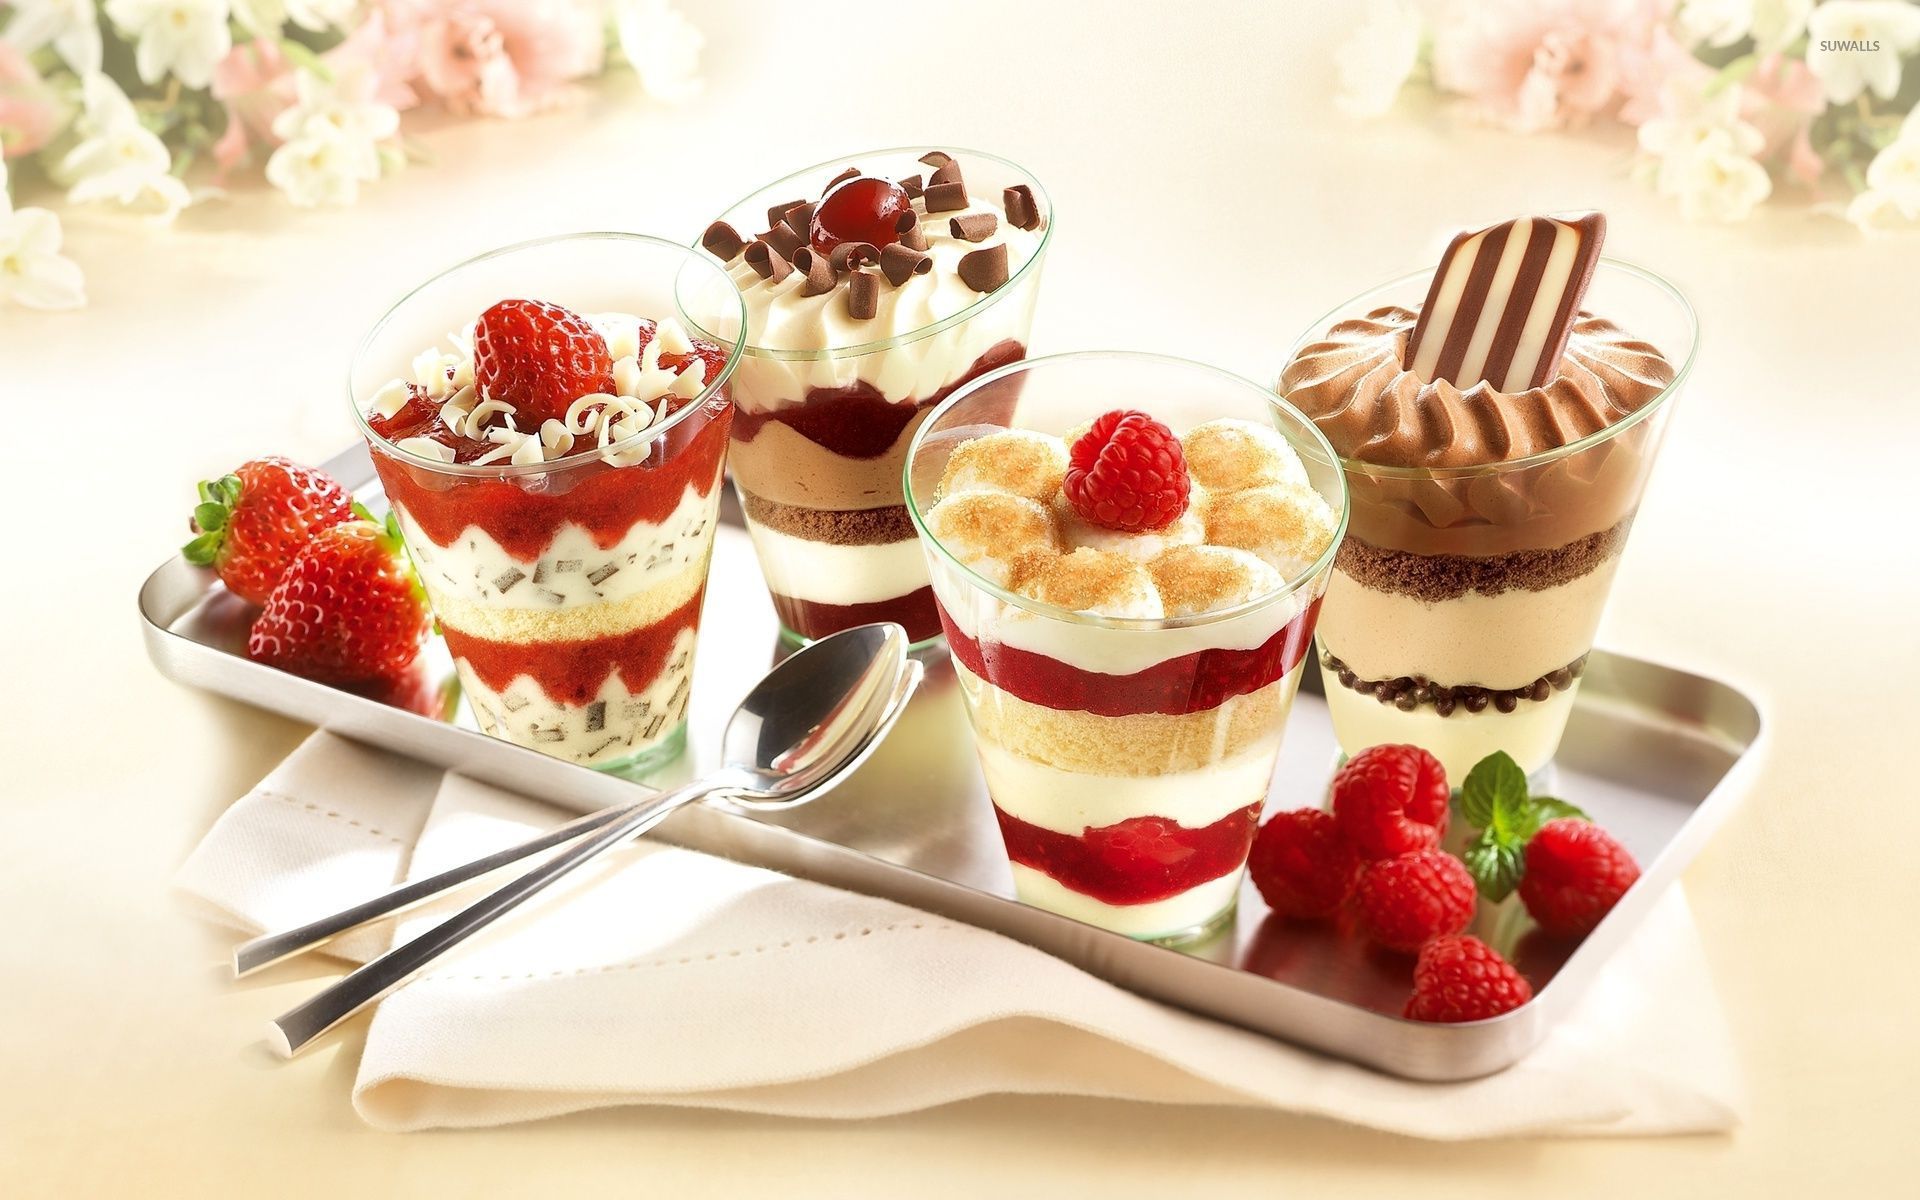 Strawberry and chocolate dessert wallpaper - Photography ...